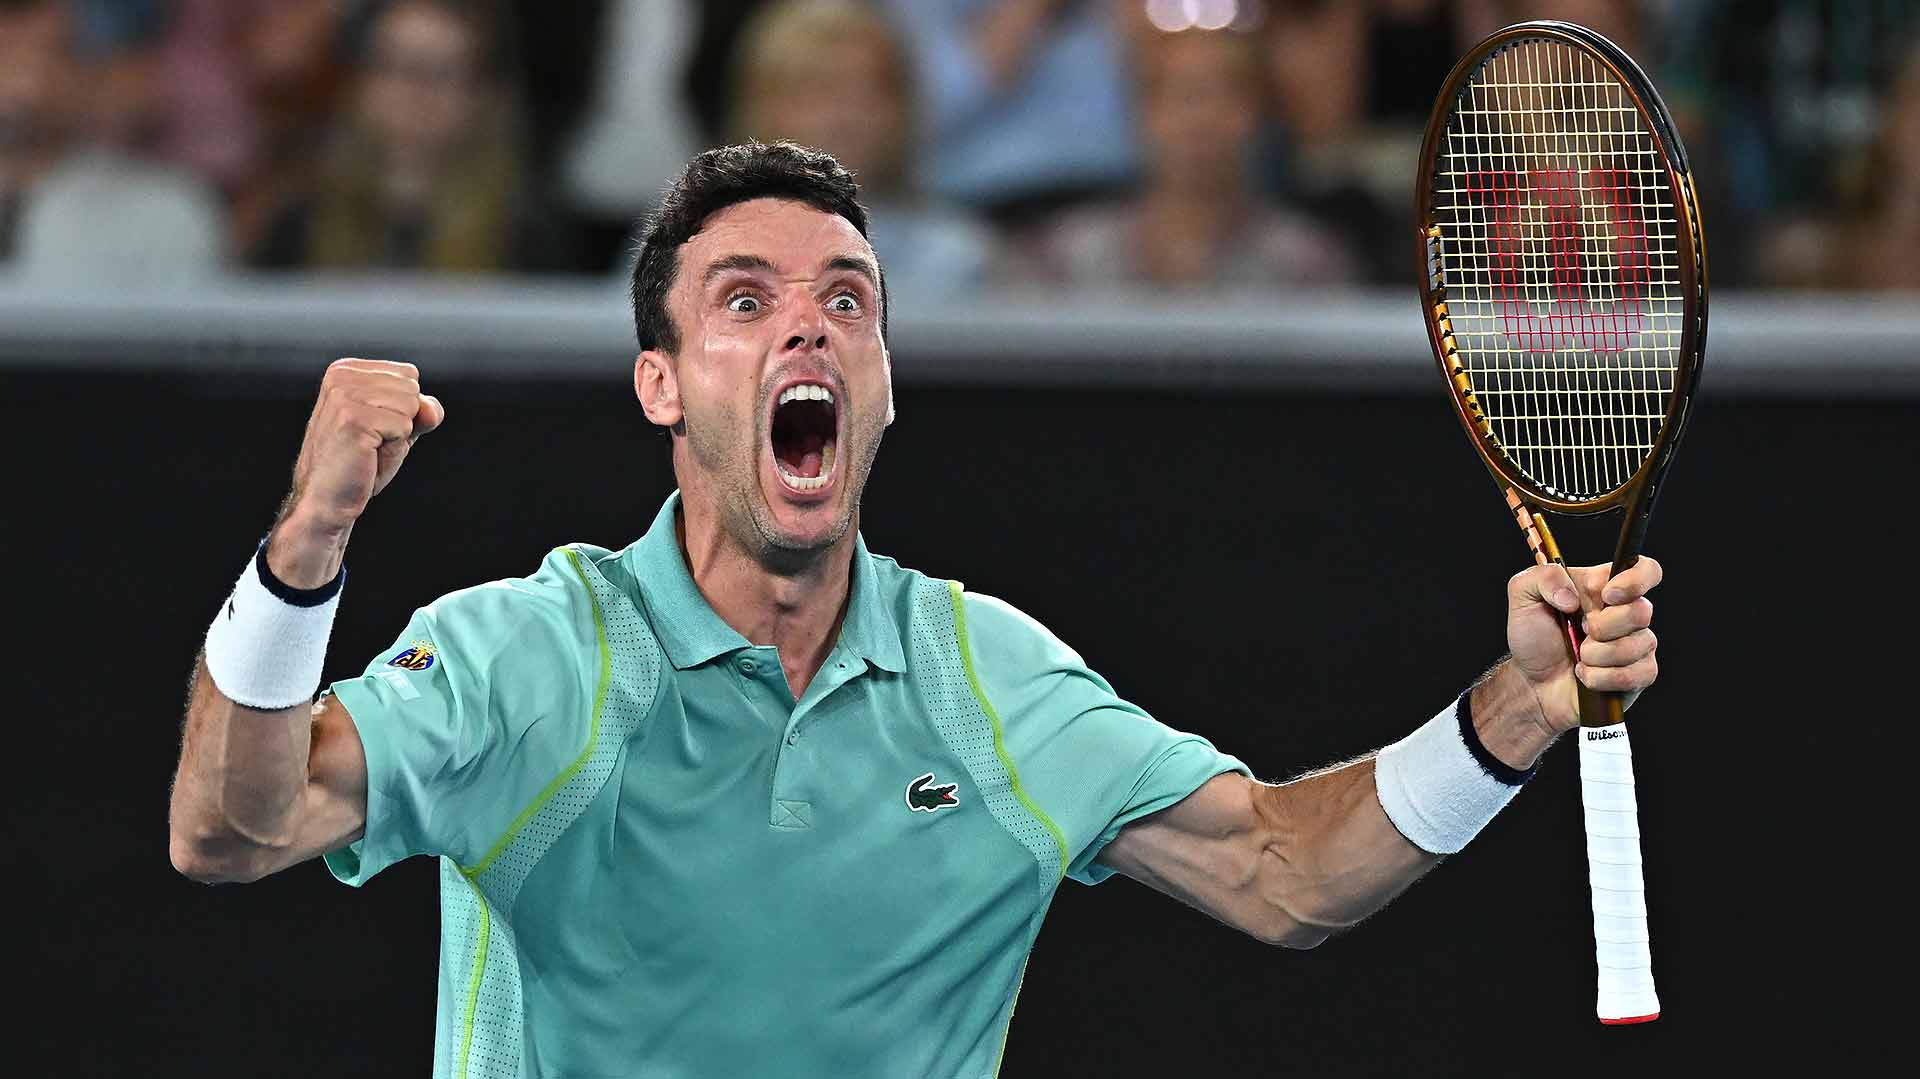 Roberto Bautista Agut sees off Andy Murray in four sets.